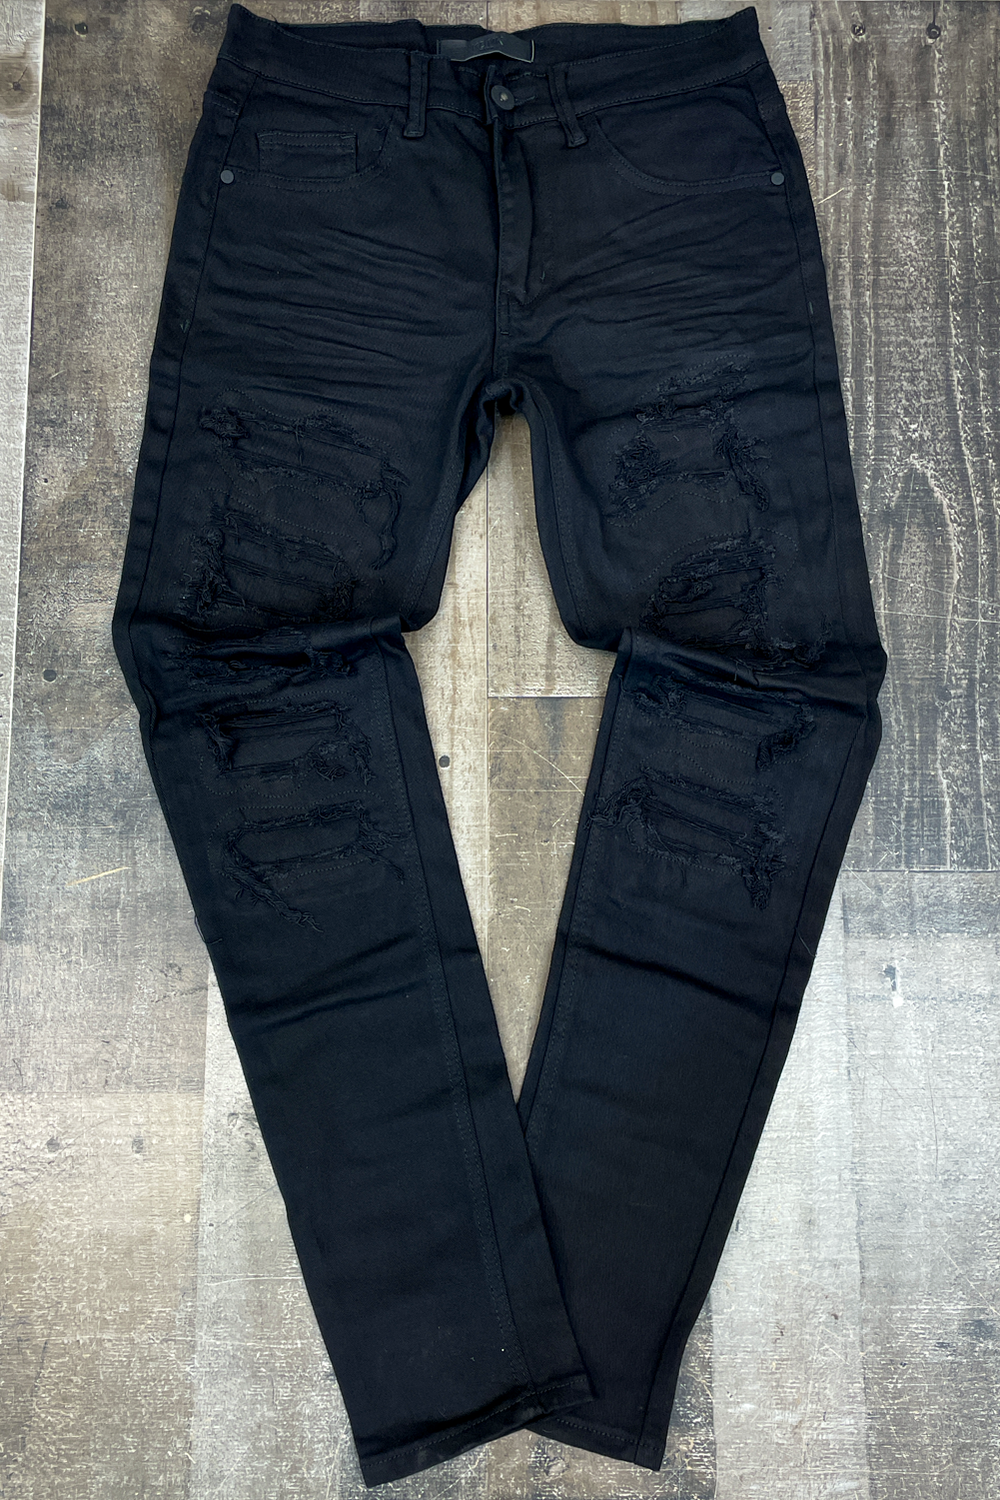 KDNK- patched distress skinny jeans